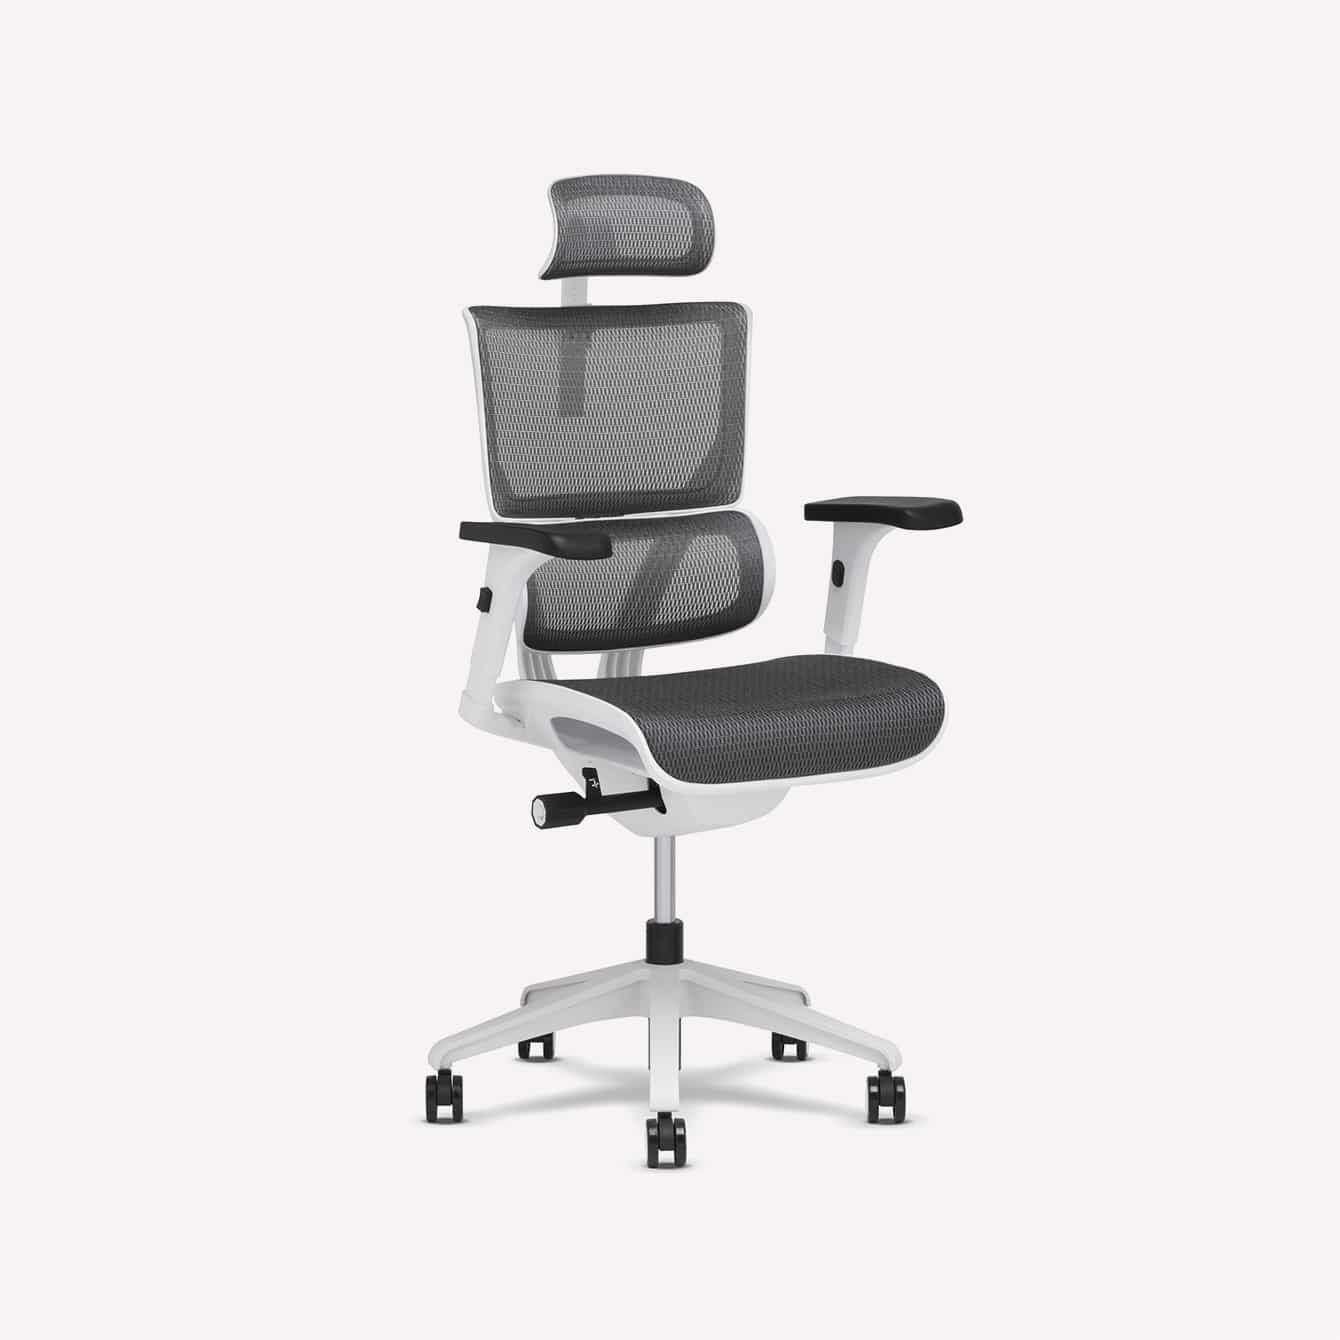 The Best Office Chairs for a Shorter Person to Sit and Fit In